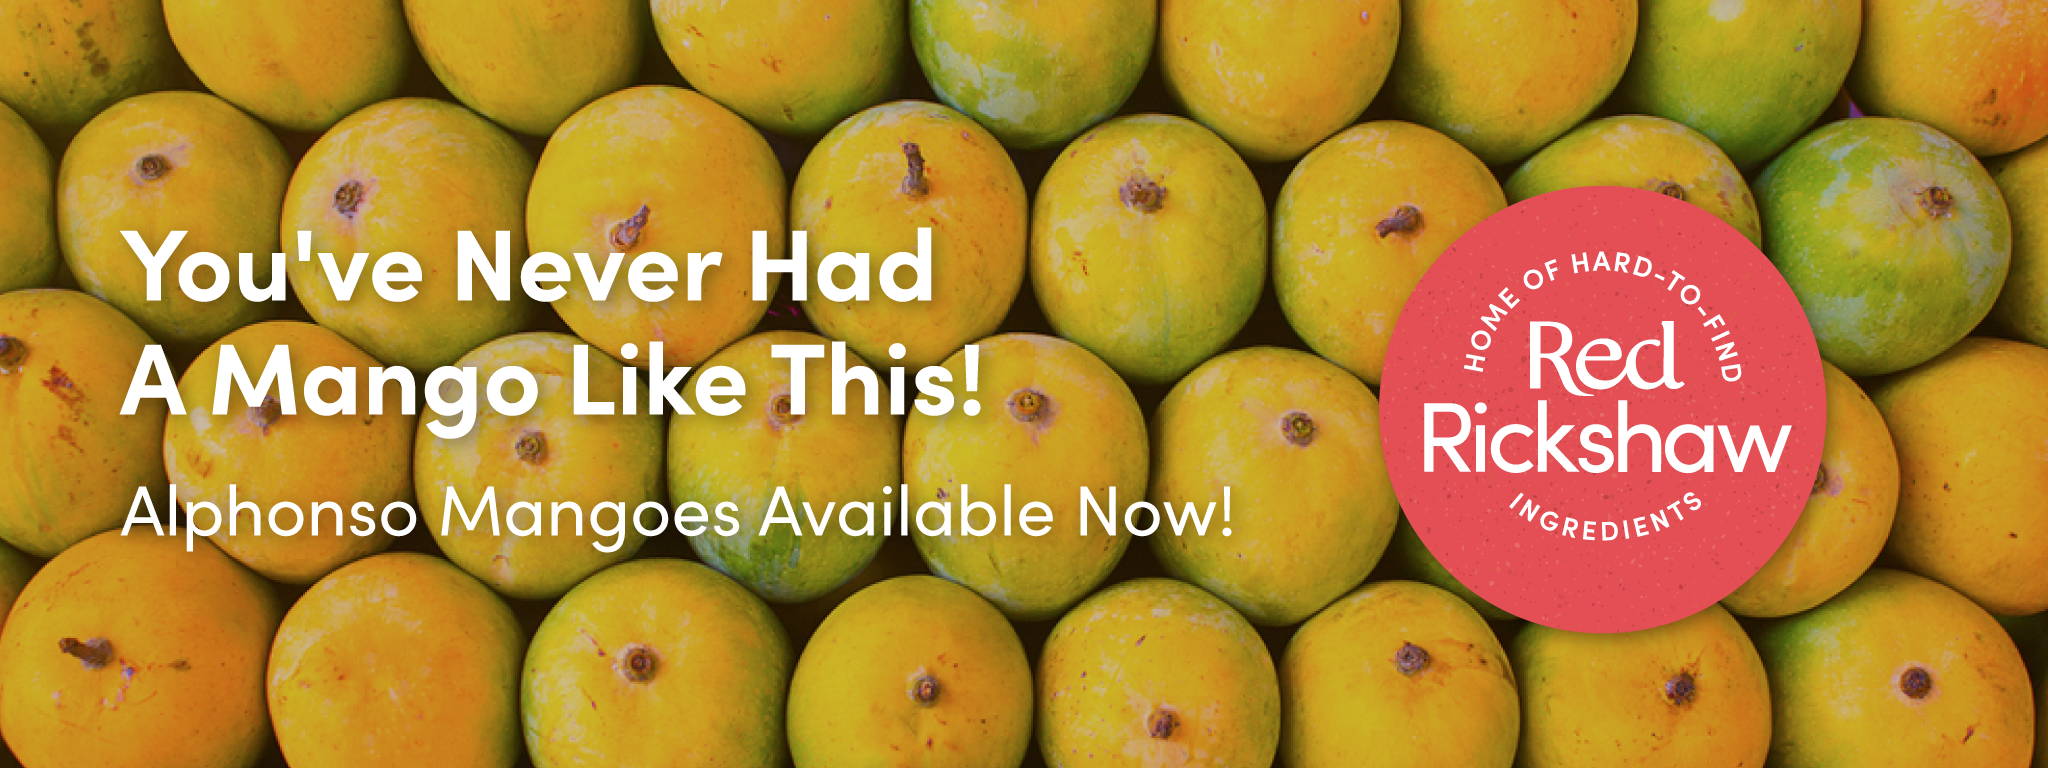 Alphonso mangoes available now. Buy here.